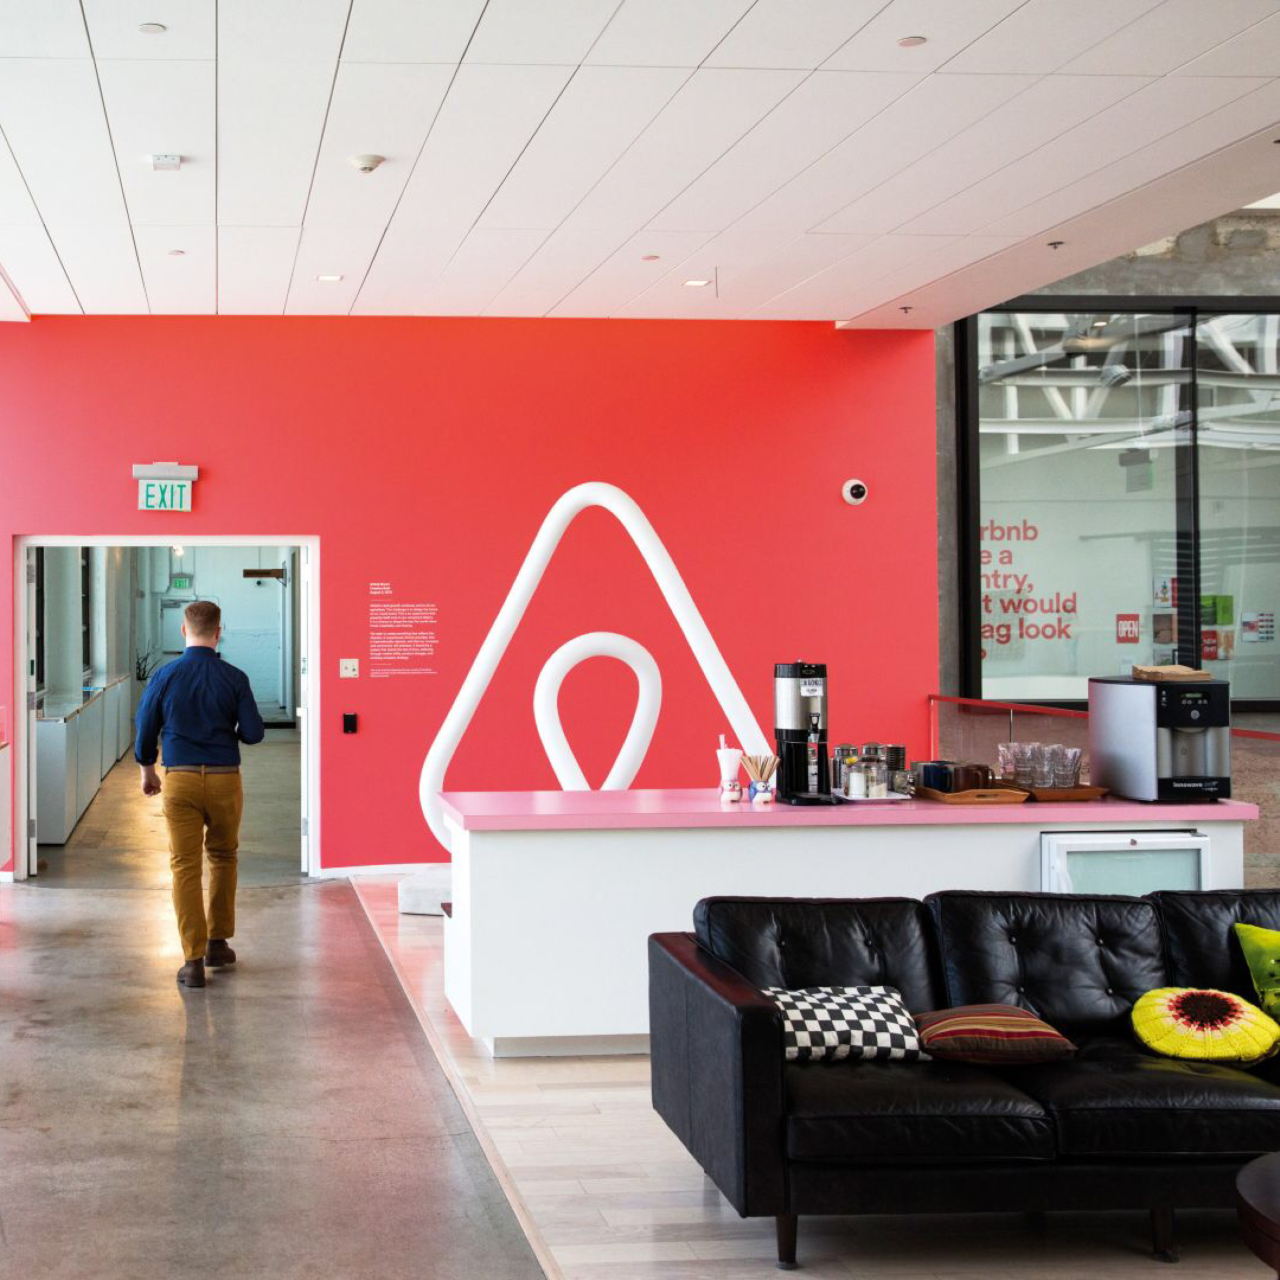 Airbnb announces pilot program prohibiting Canadians under 25 from booking entire homes